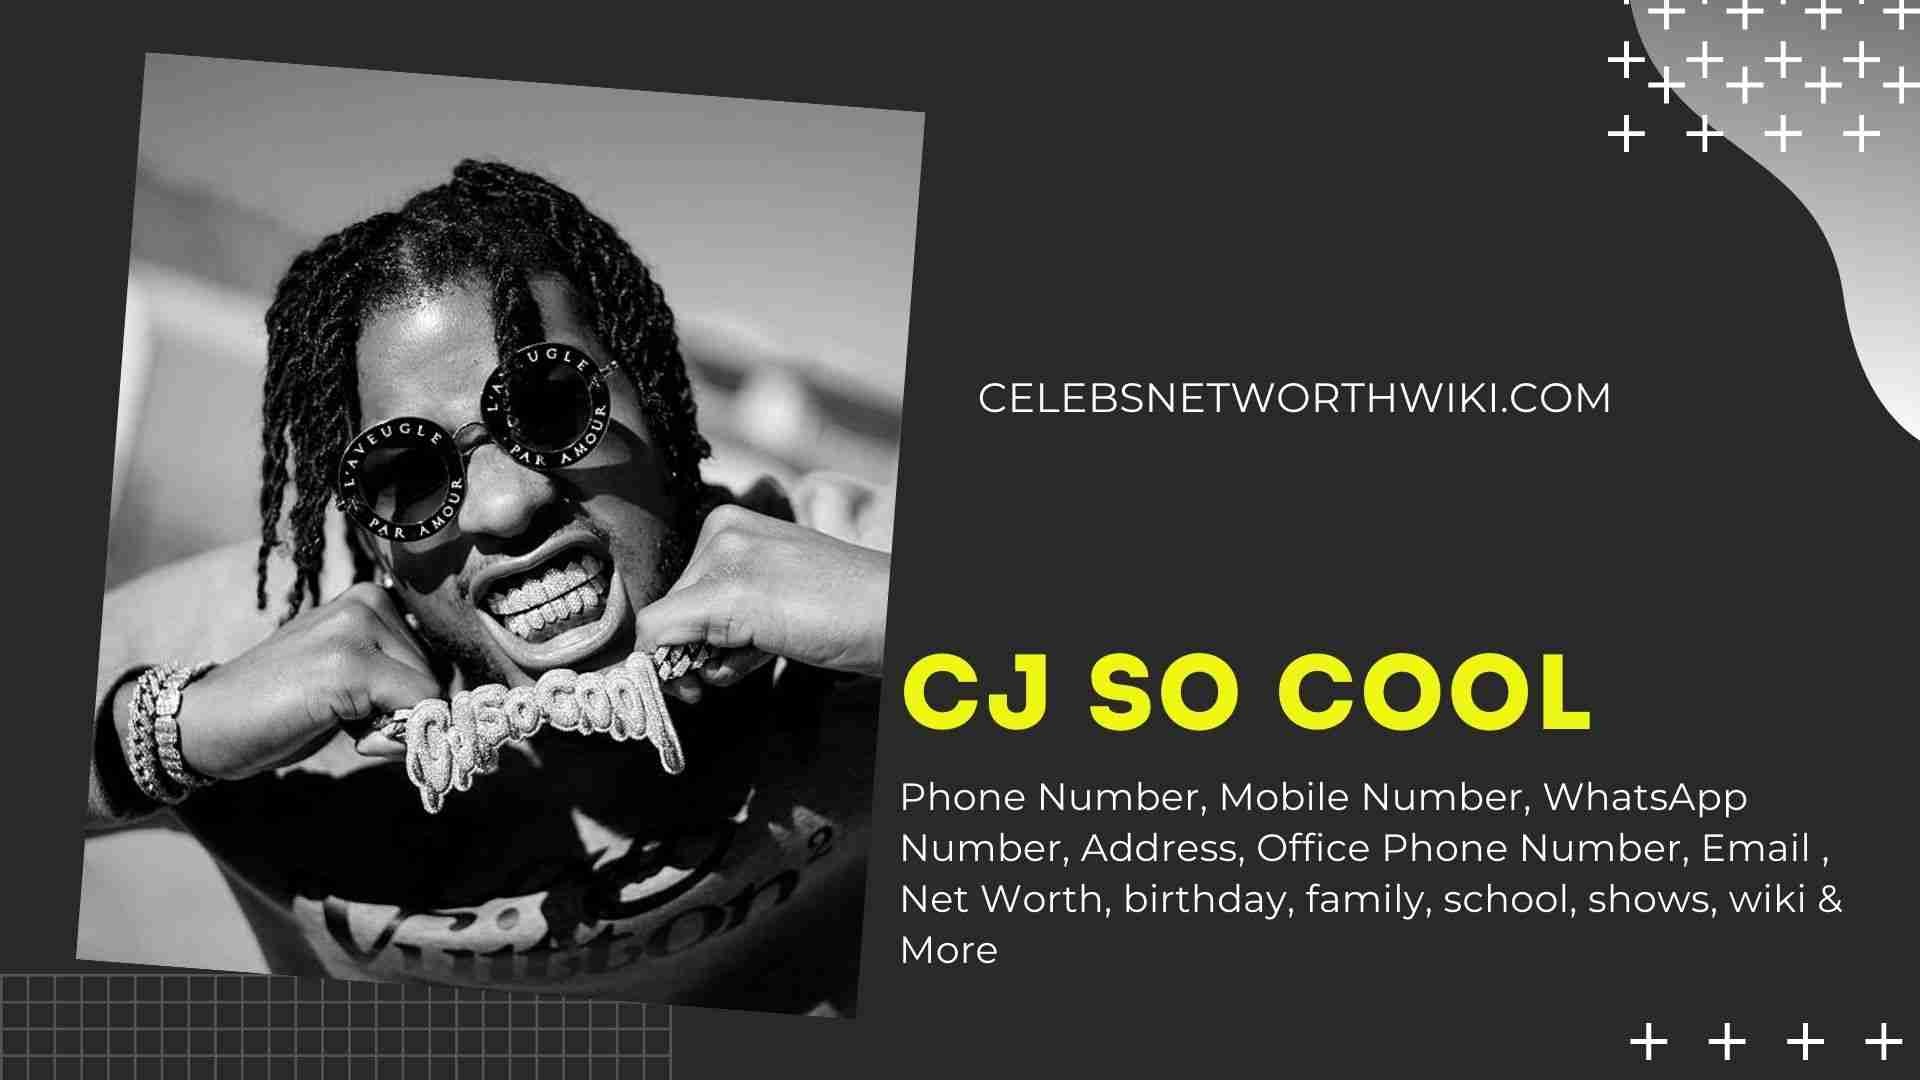 CJ SO COOL Phone Number WhatsApp Number Contact Mobile.